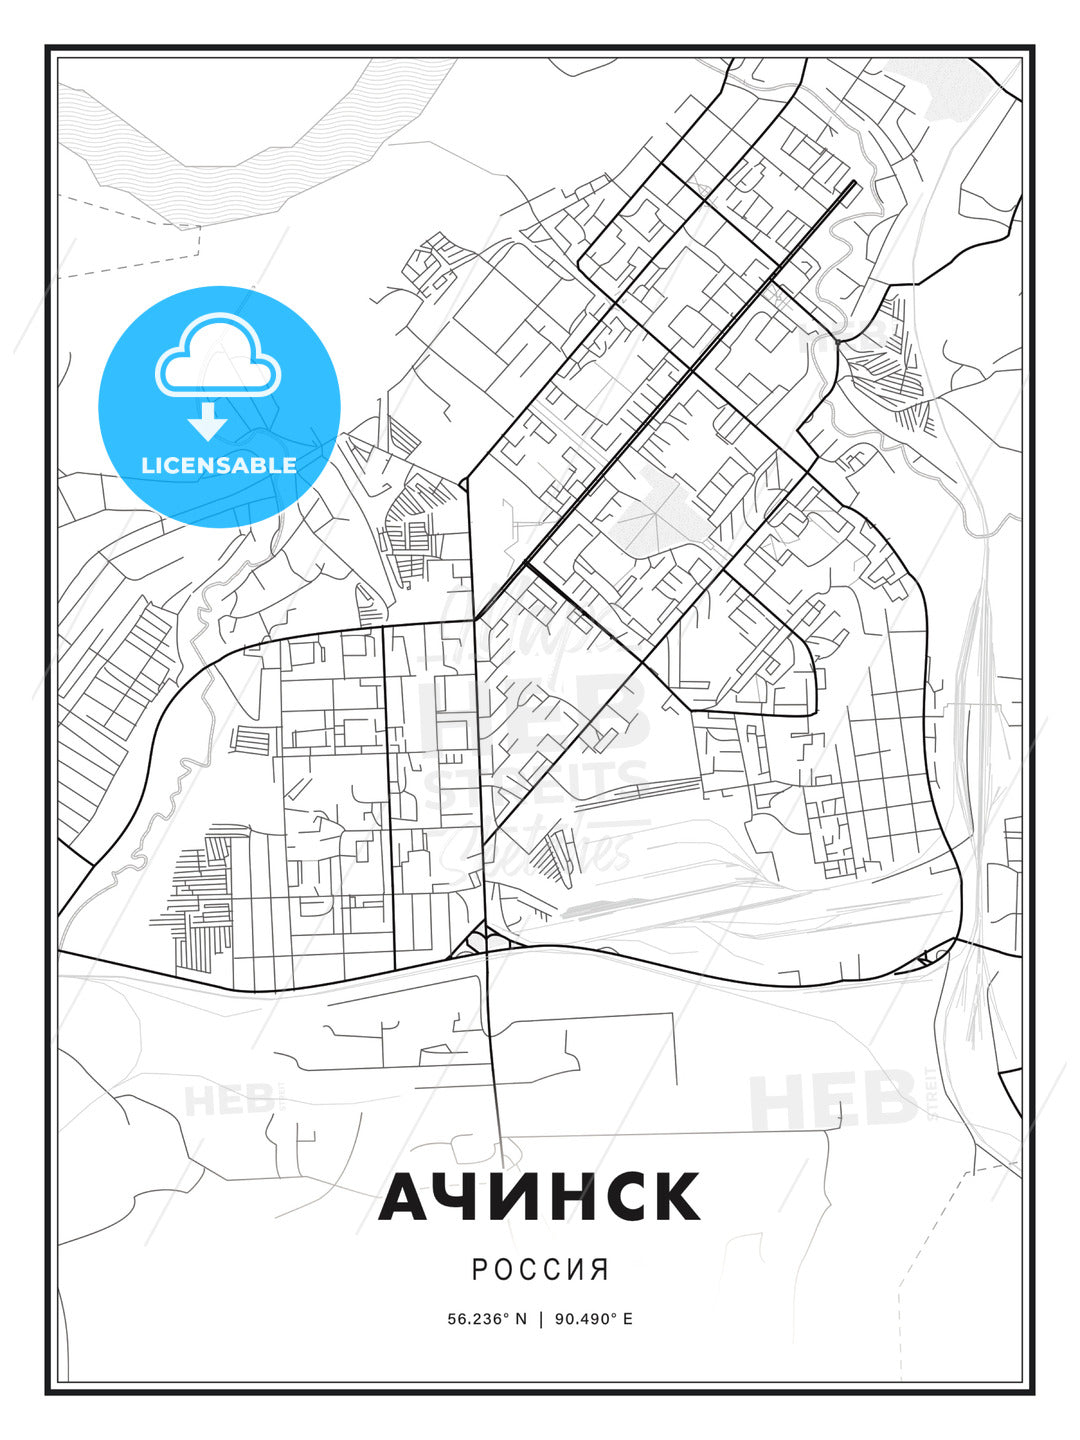 АЧИНСК / Achinsk, Russia, Modern Print Template in Various Formats - HEBSTREITS Sketches